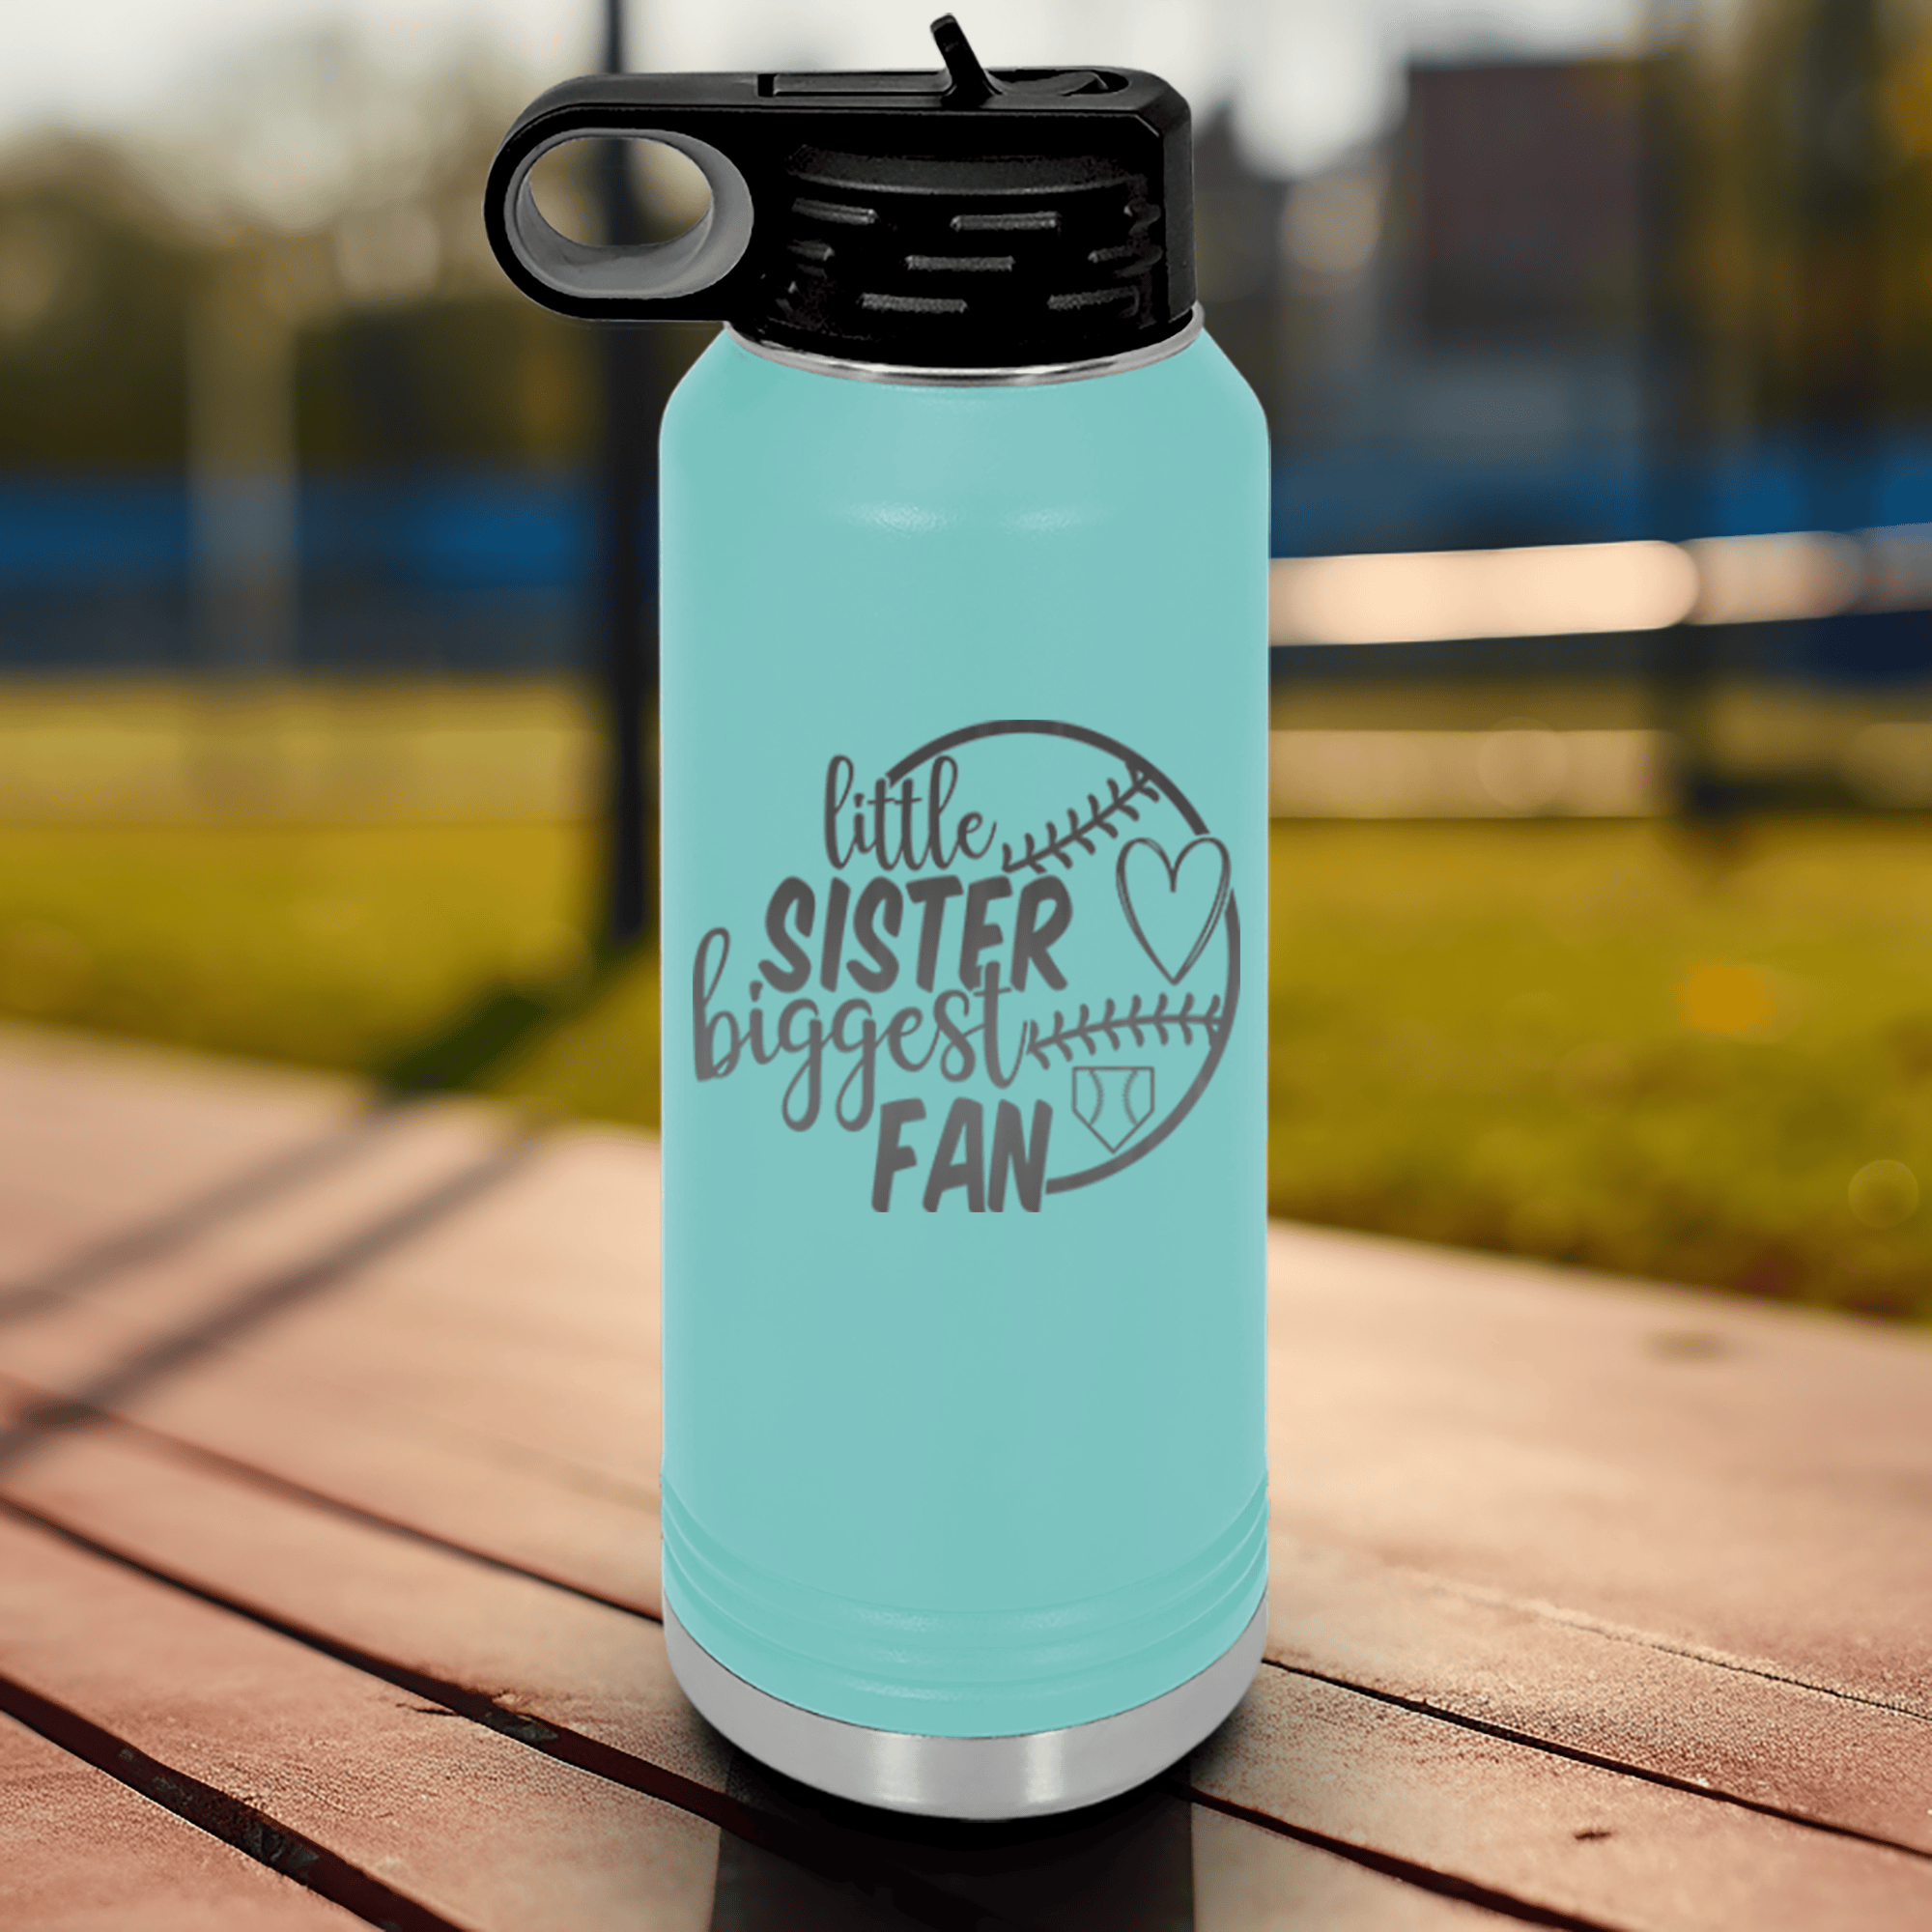 Teal Baseball Water Bottle With Cheering From The Sidelines Sister Design